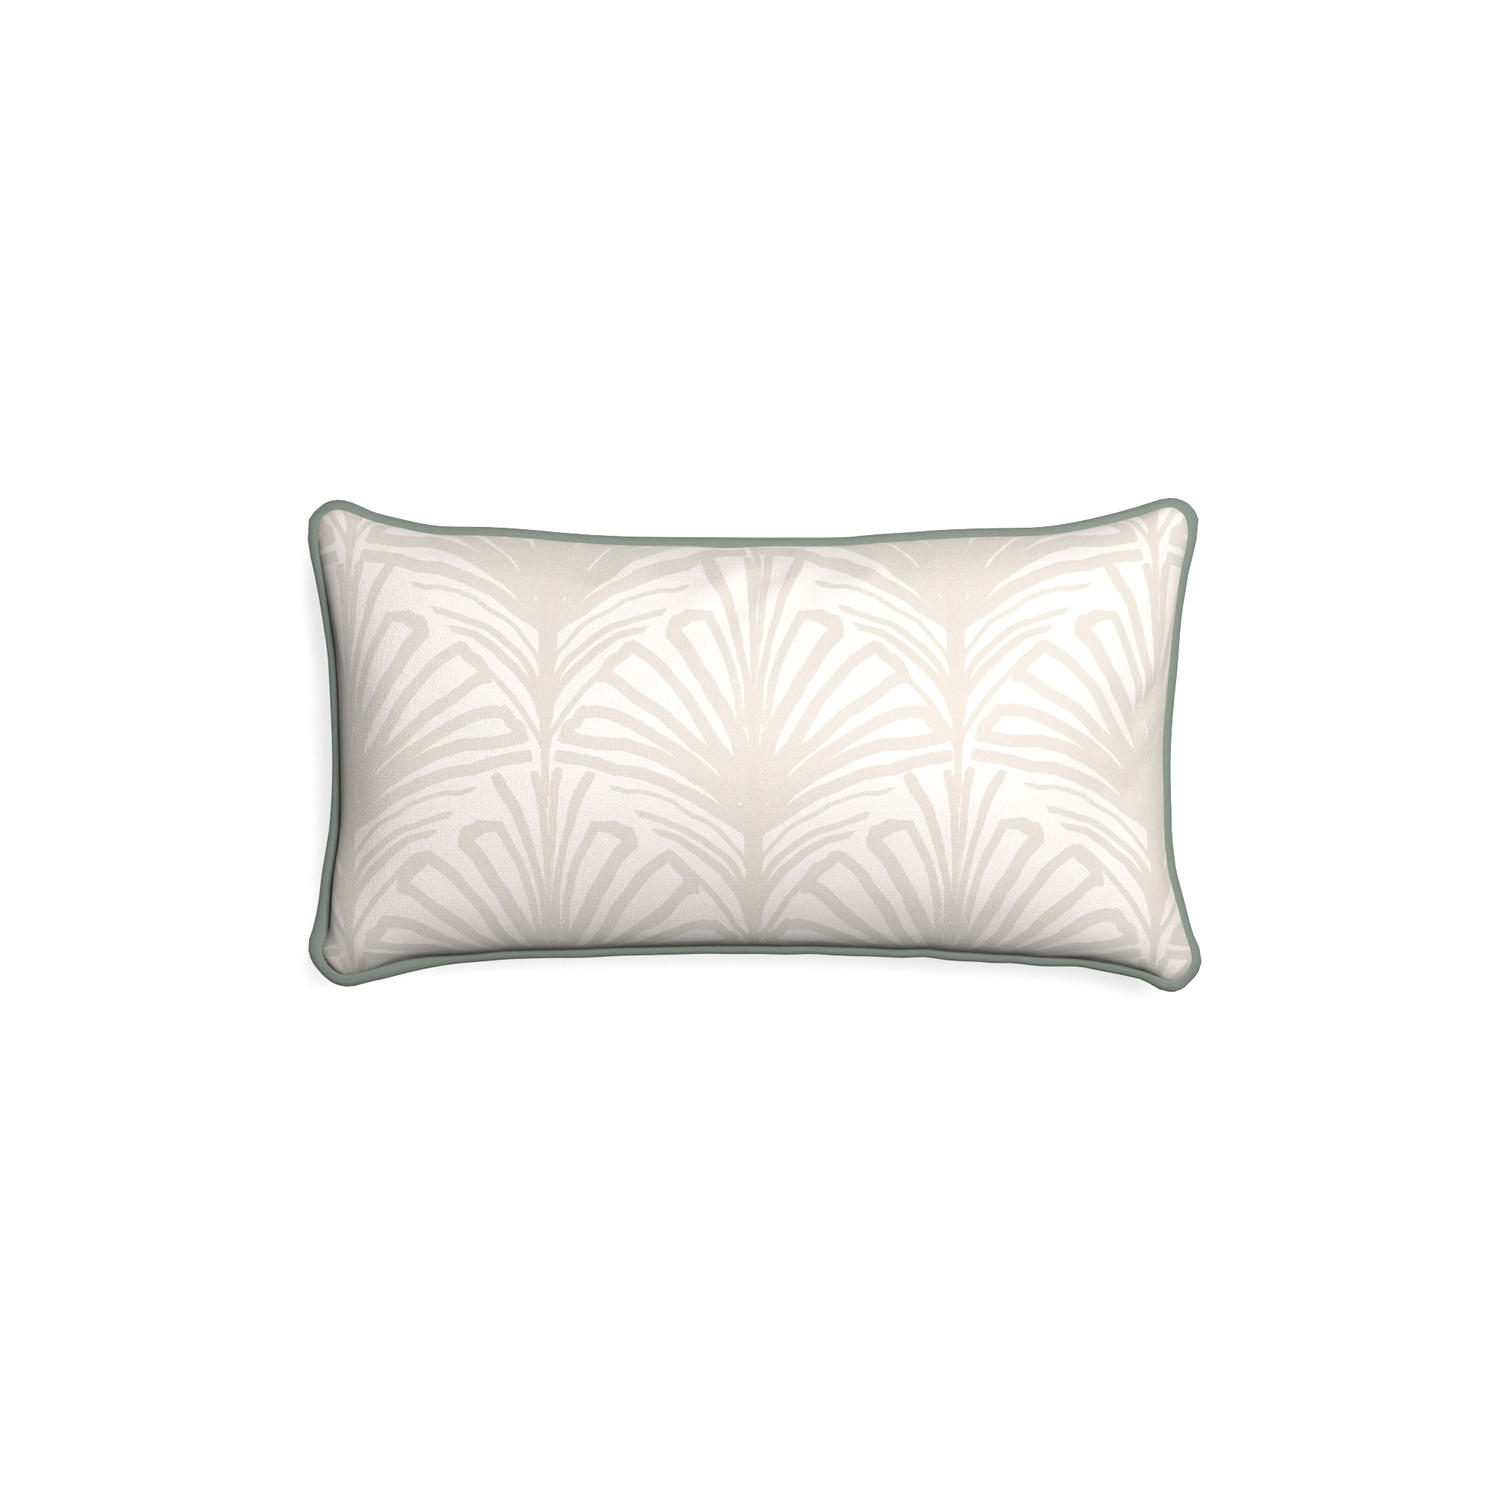 Petite-lumbar suzy sand custom beige palmpillow with sage piping on white background